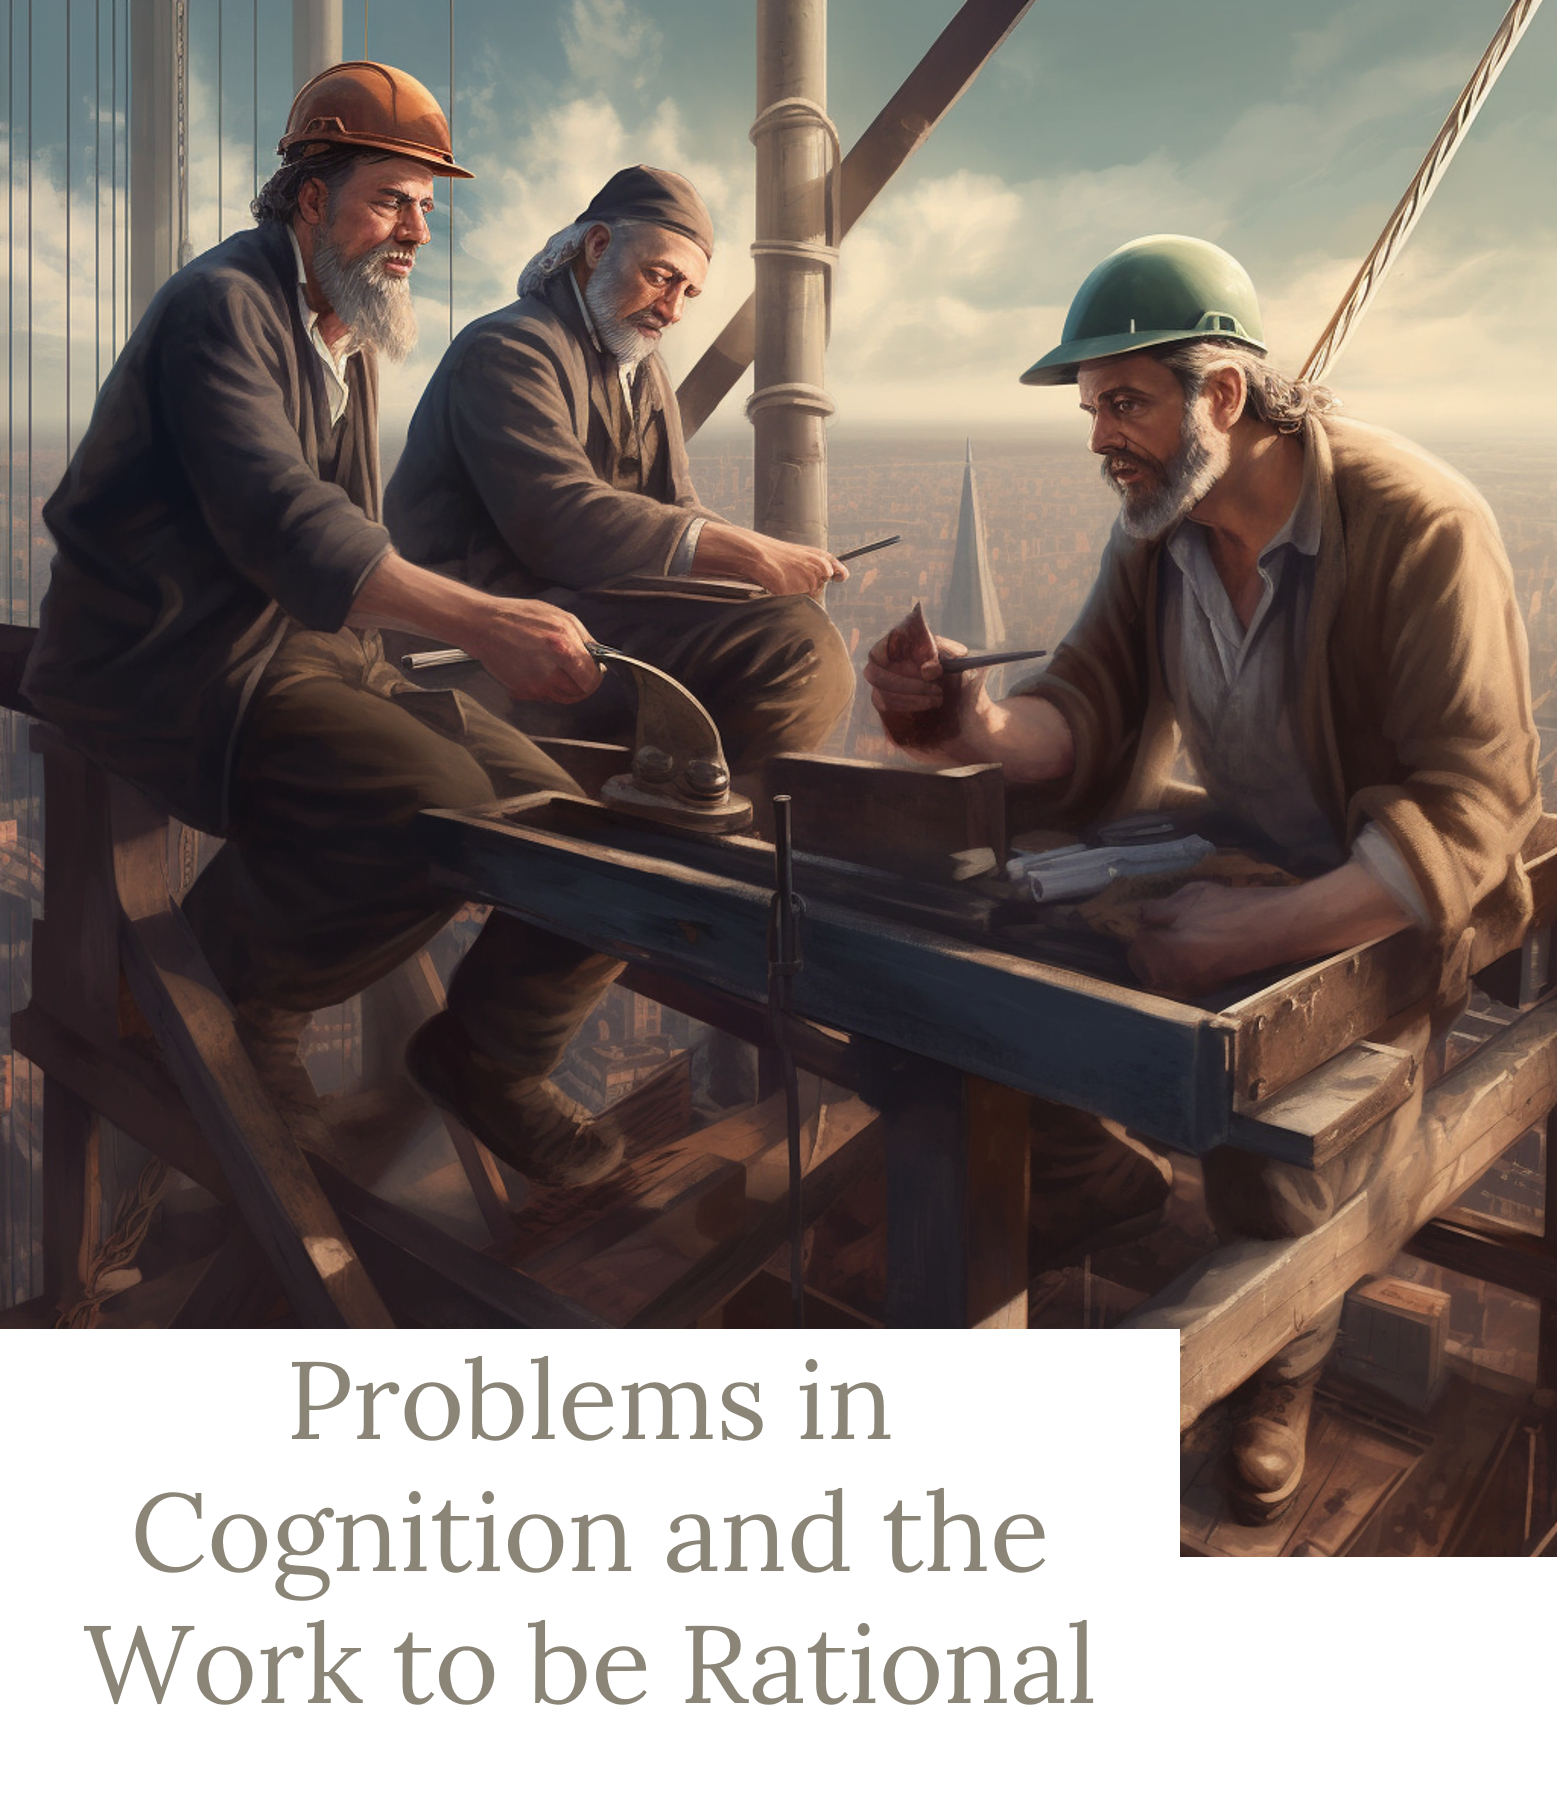 Problems in Cognition and the Work to be Rational